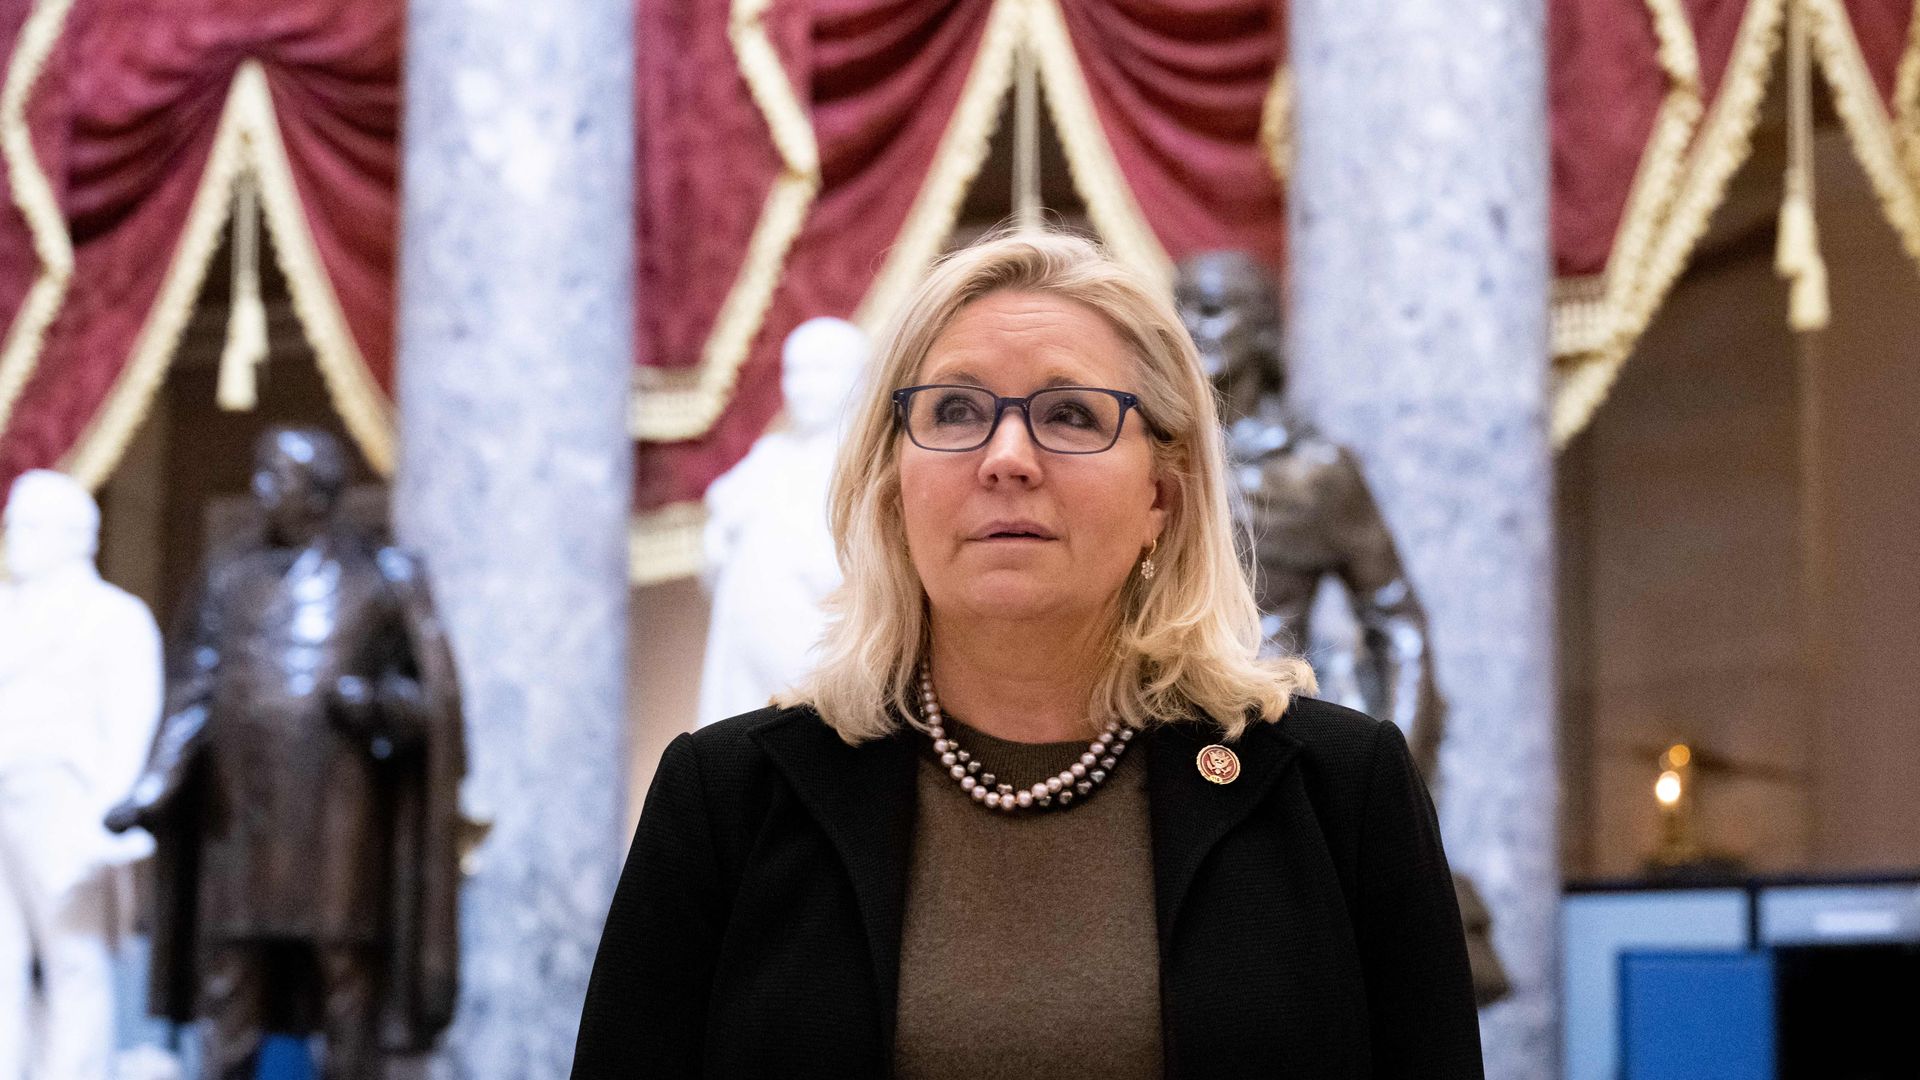 US Representative Liz Cheney, Republican of Wyoming and a member of the House Select Committee to Investigate the January 6th Attack on the US Capitol, walks through the US Capitol.